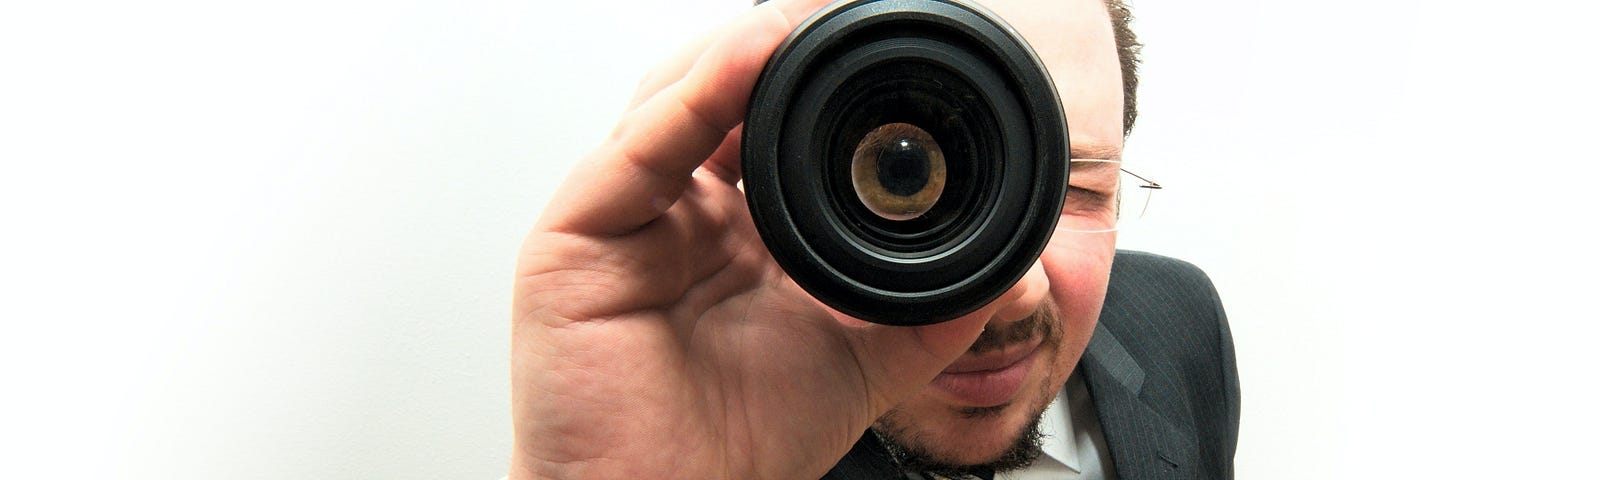 A man in a black suit and tie looking through a monocular.